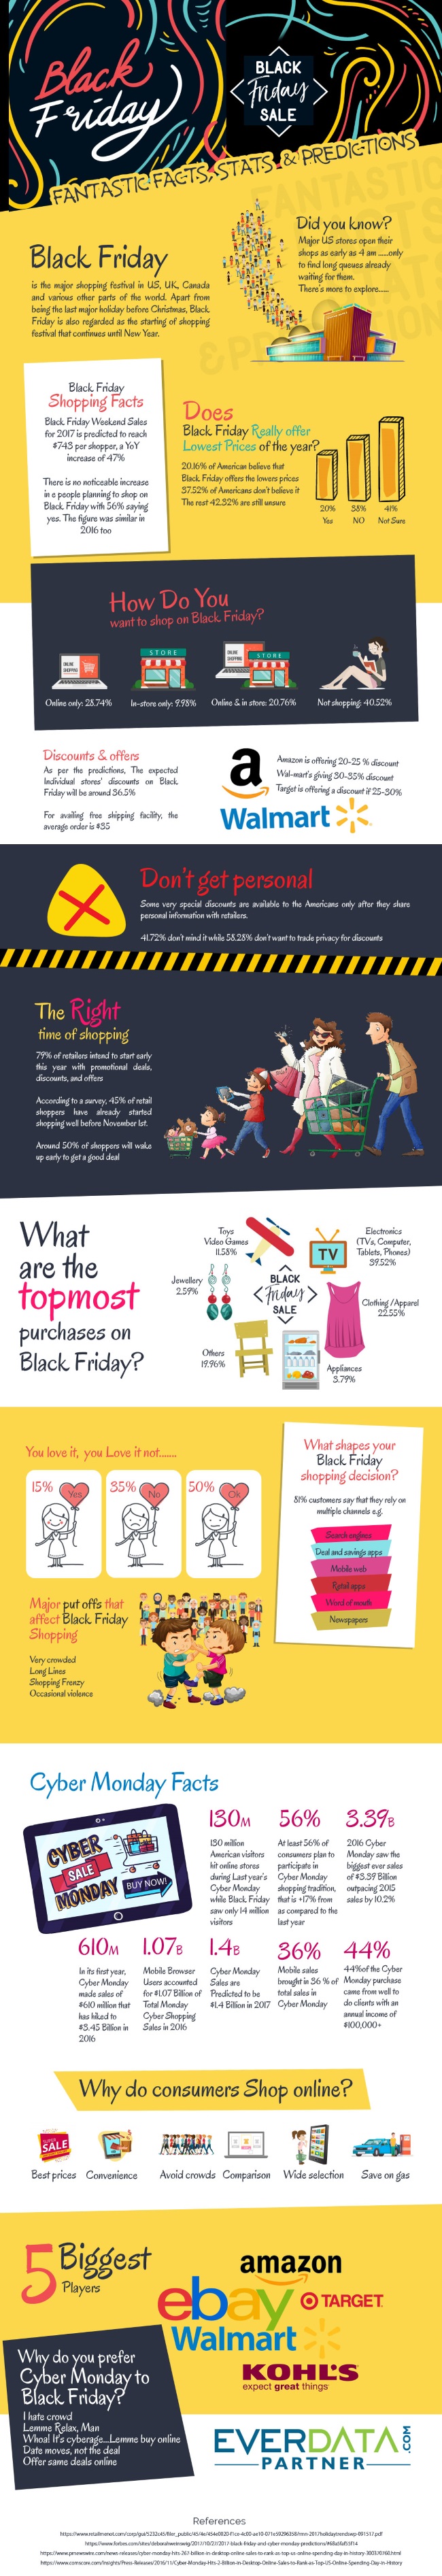 black friday business facts and statistics - Changing character of Black Friday: In-Store VS Online Shopping